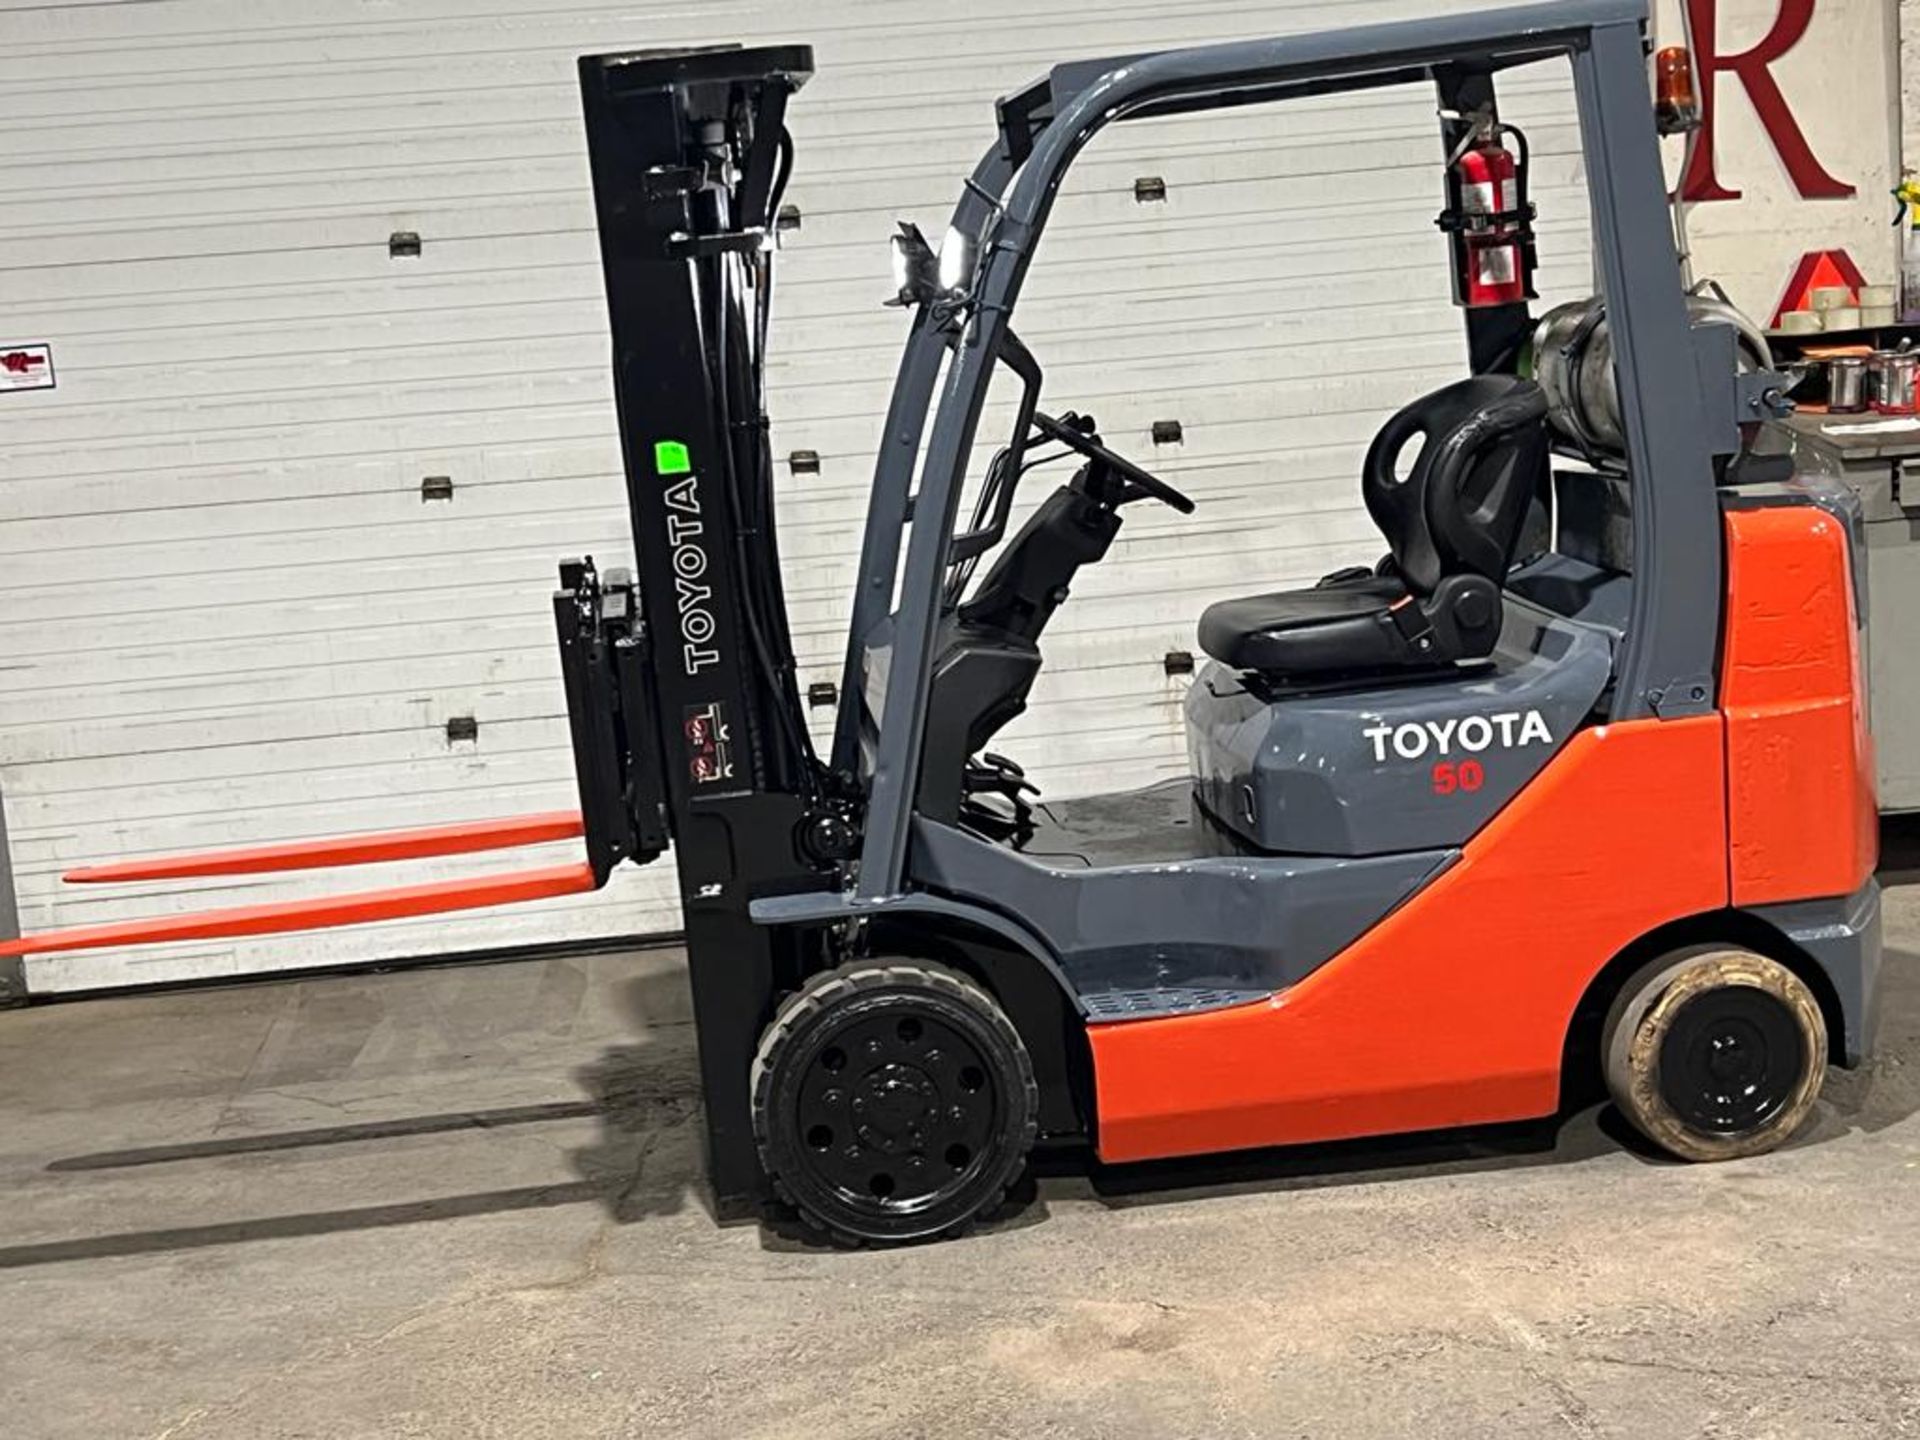 2007 Toyota 5,000lbs Capacity LPG (Propane) Forklift with sideshift and 3-STAGE MAST (no propane